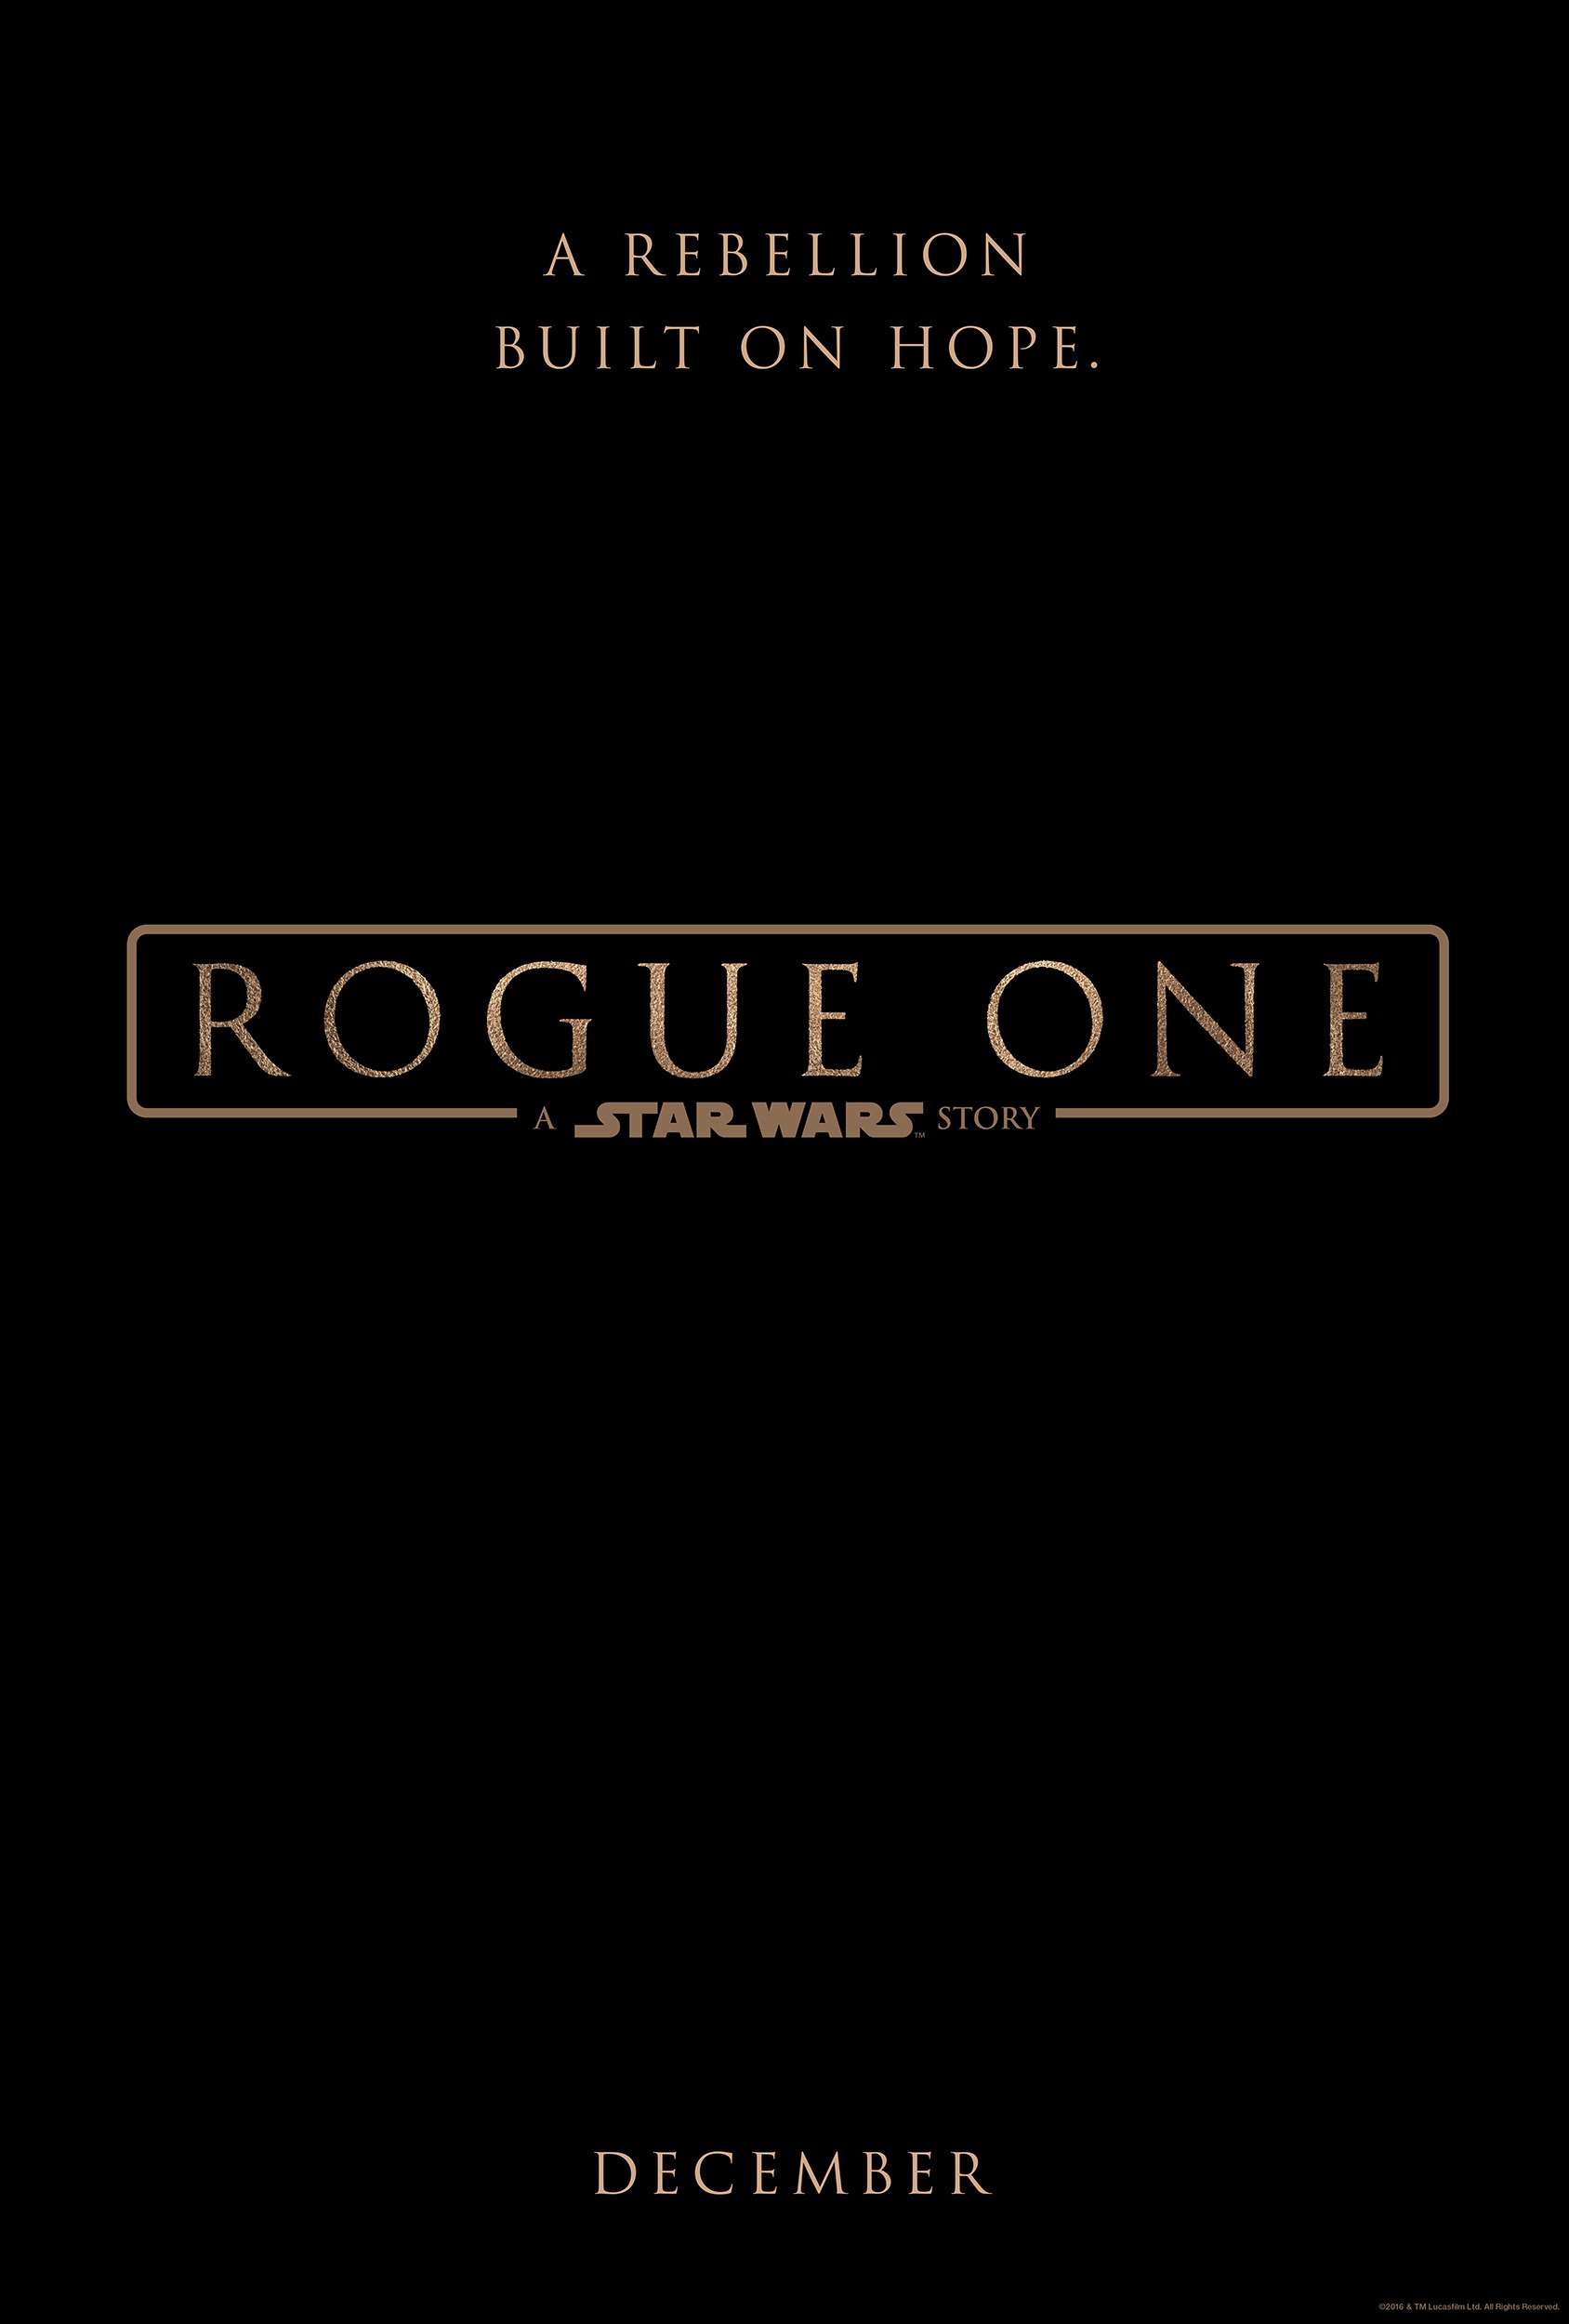 Online Movie Rogue One: A Star Wars Story Watch 2016 Vmas